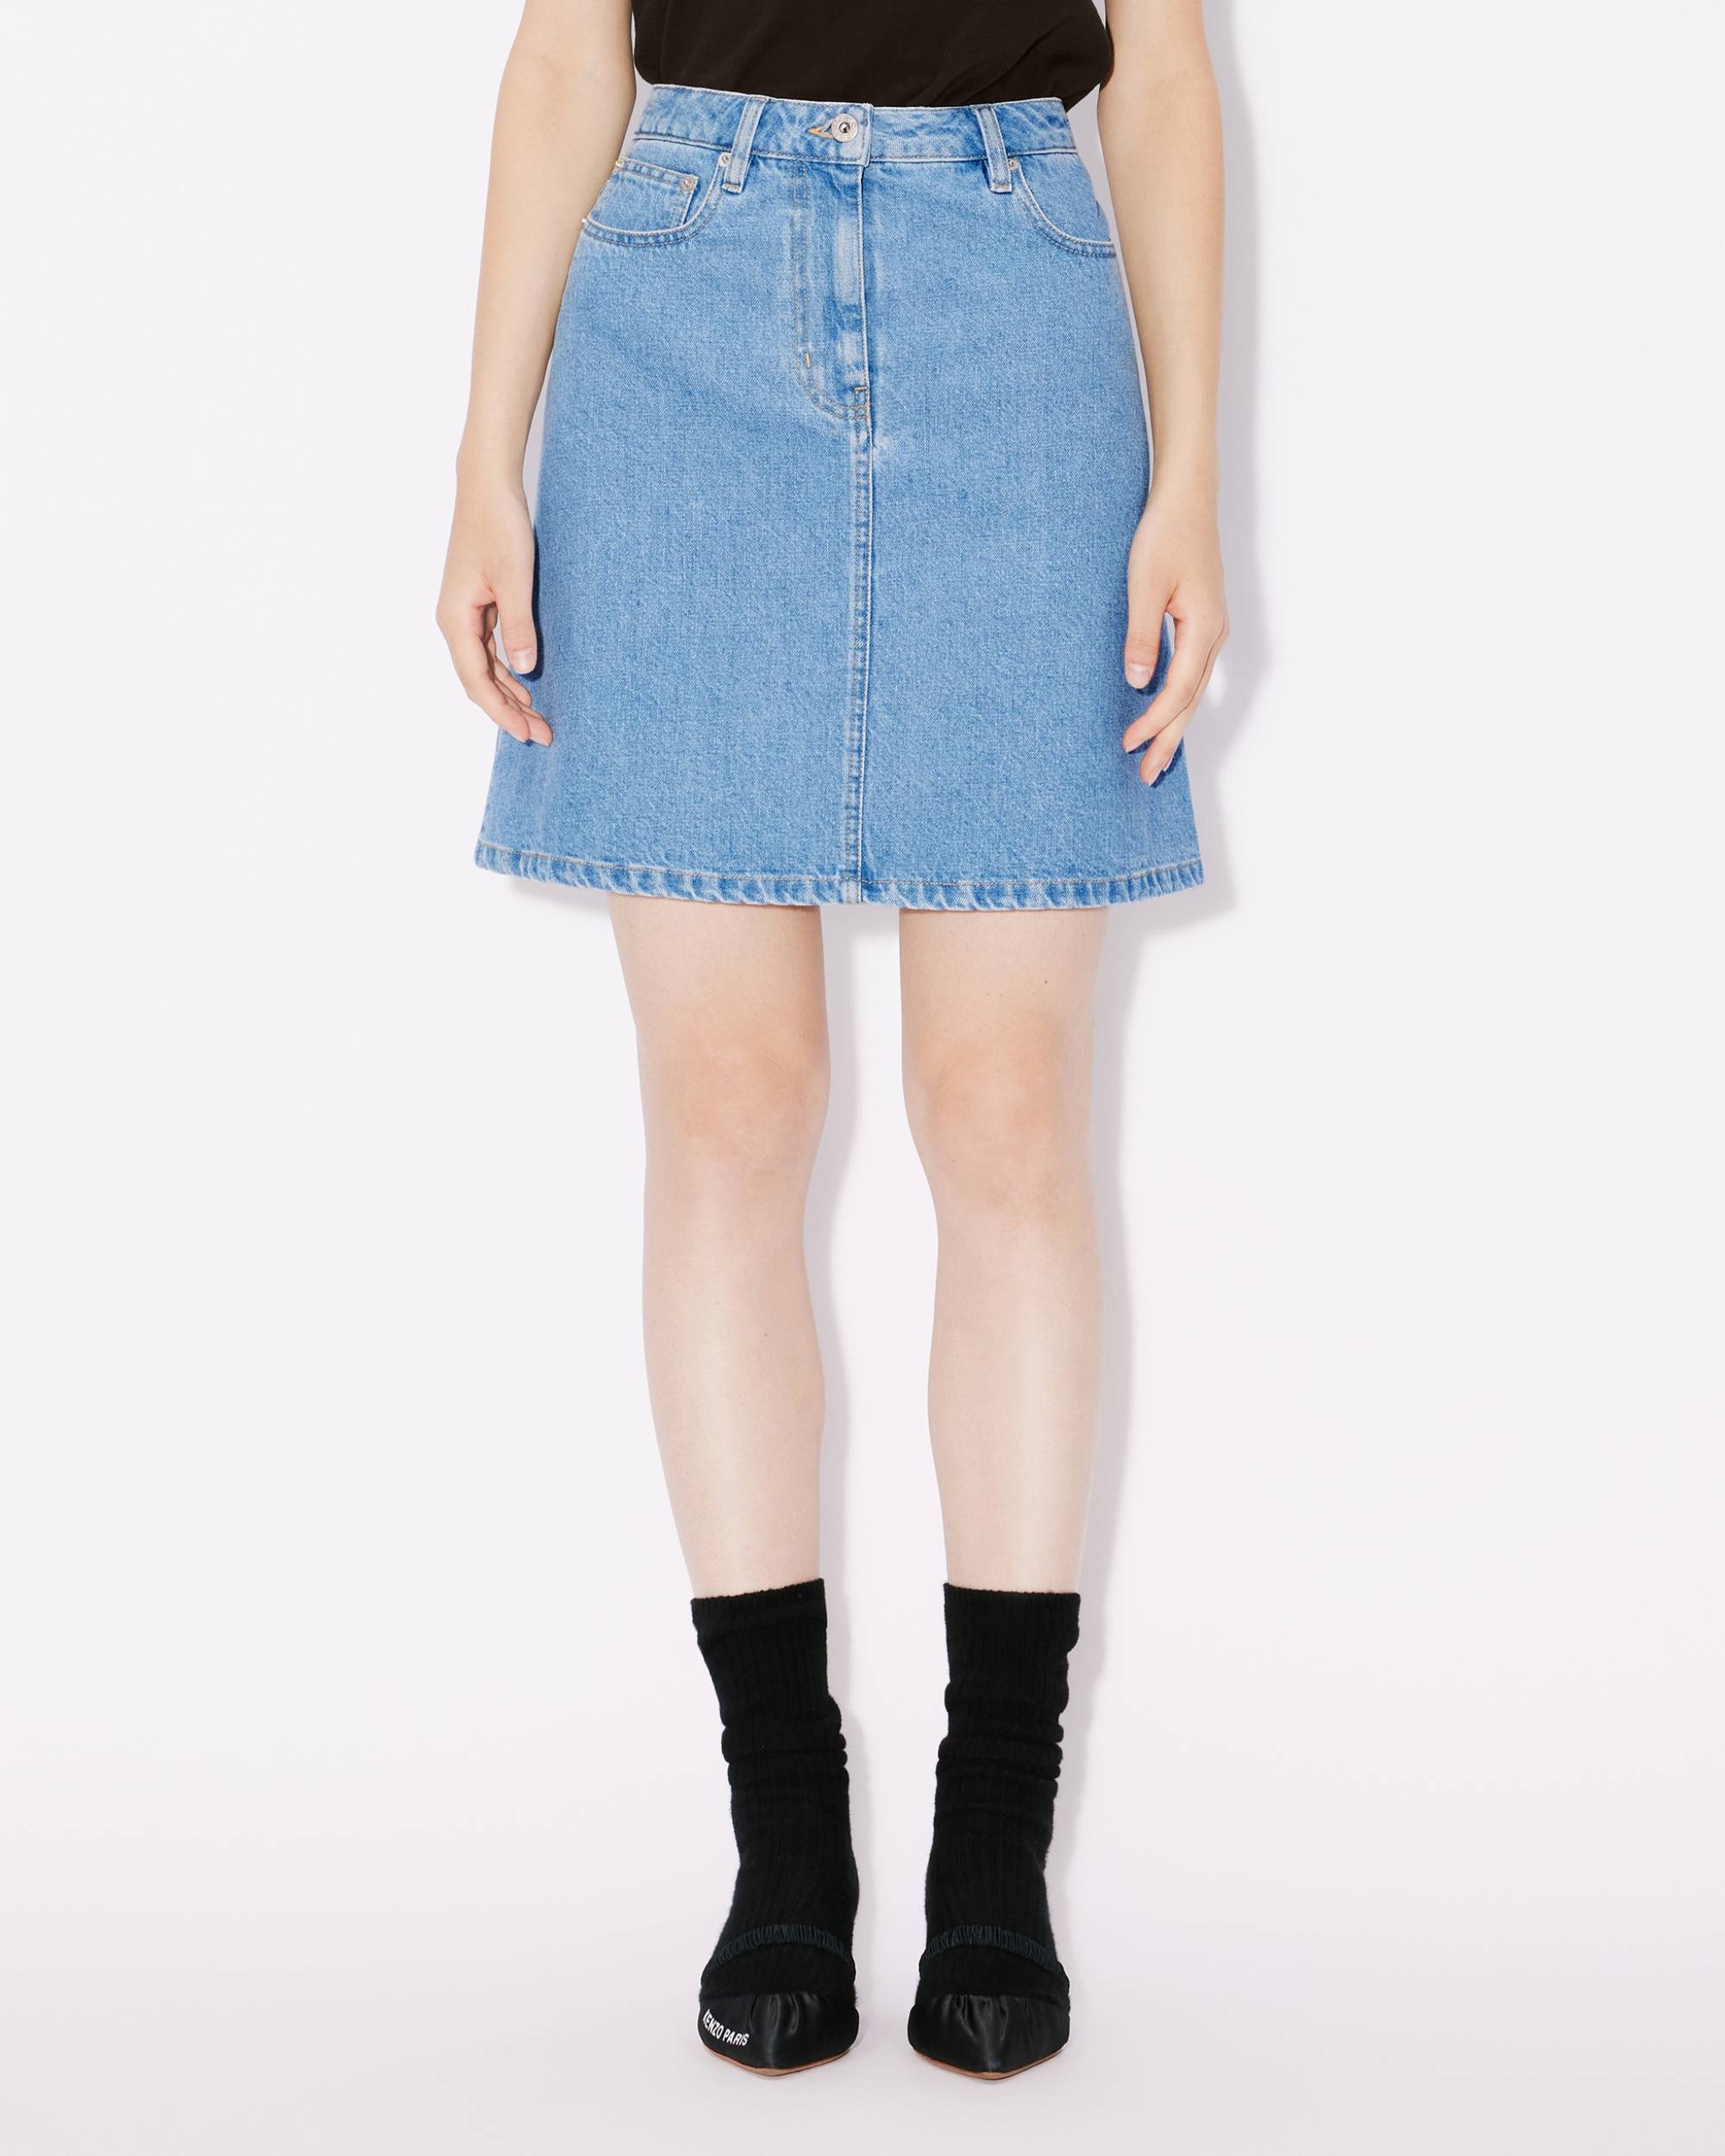 'Year of the Dragon' embroidered Japanese denim miniskirt - 4